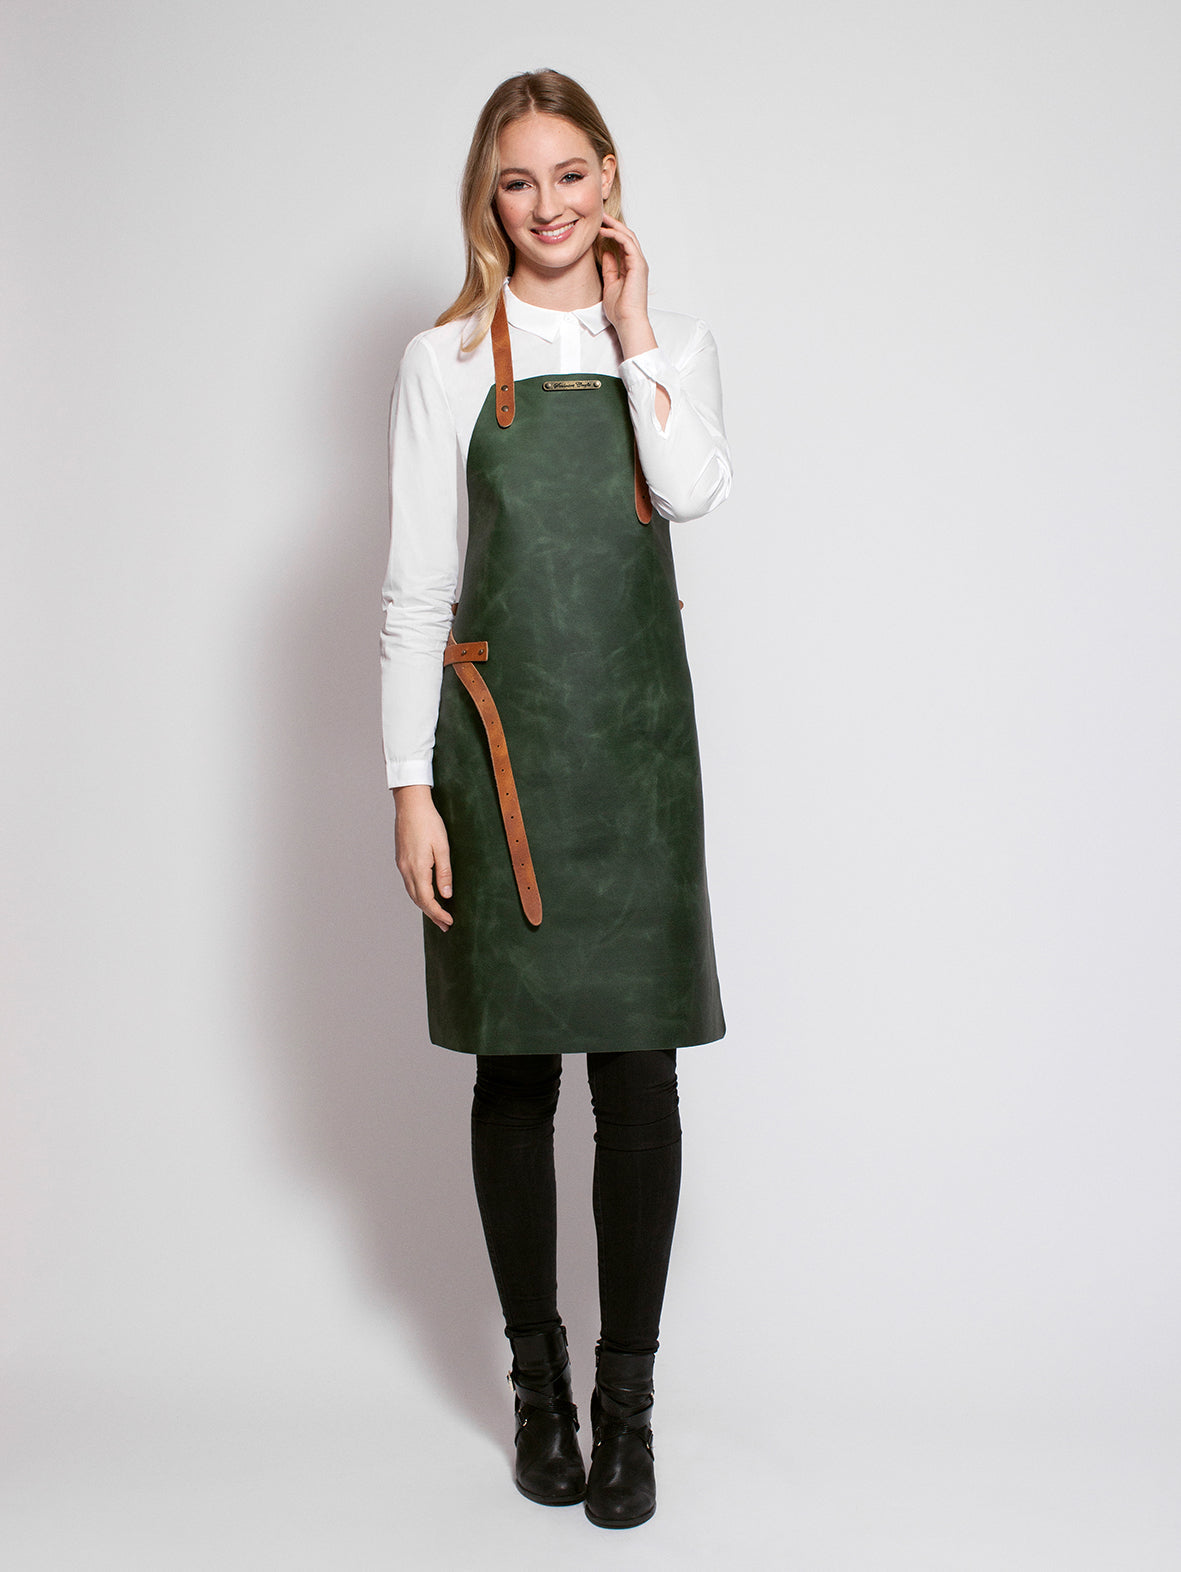 Leather Apron Basic Green by Stalwart -  ChefsCotton